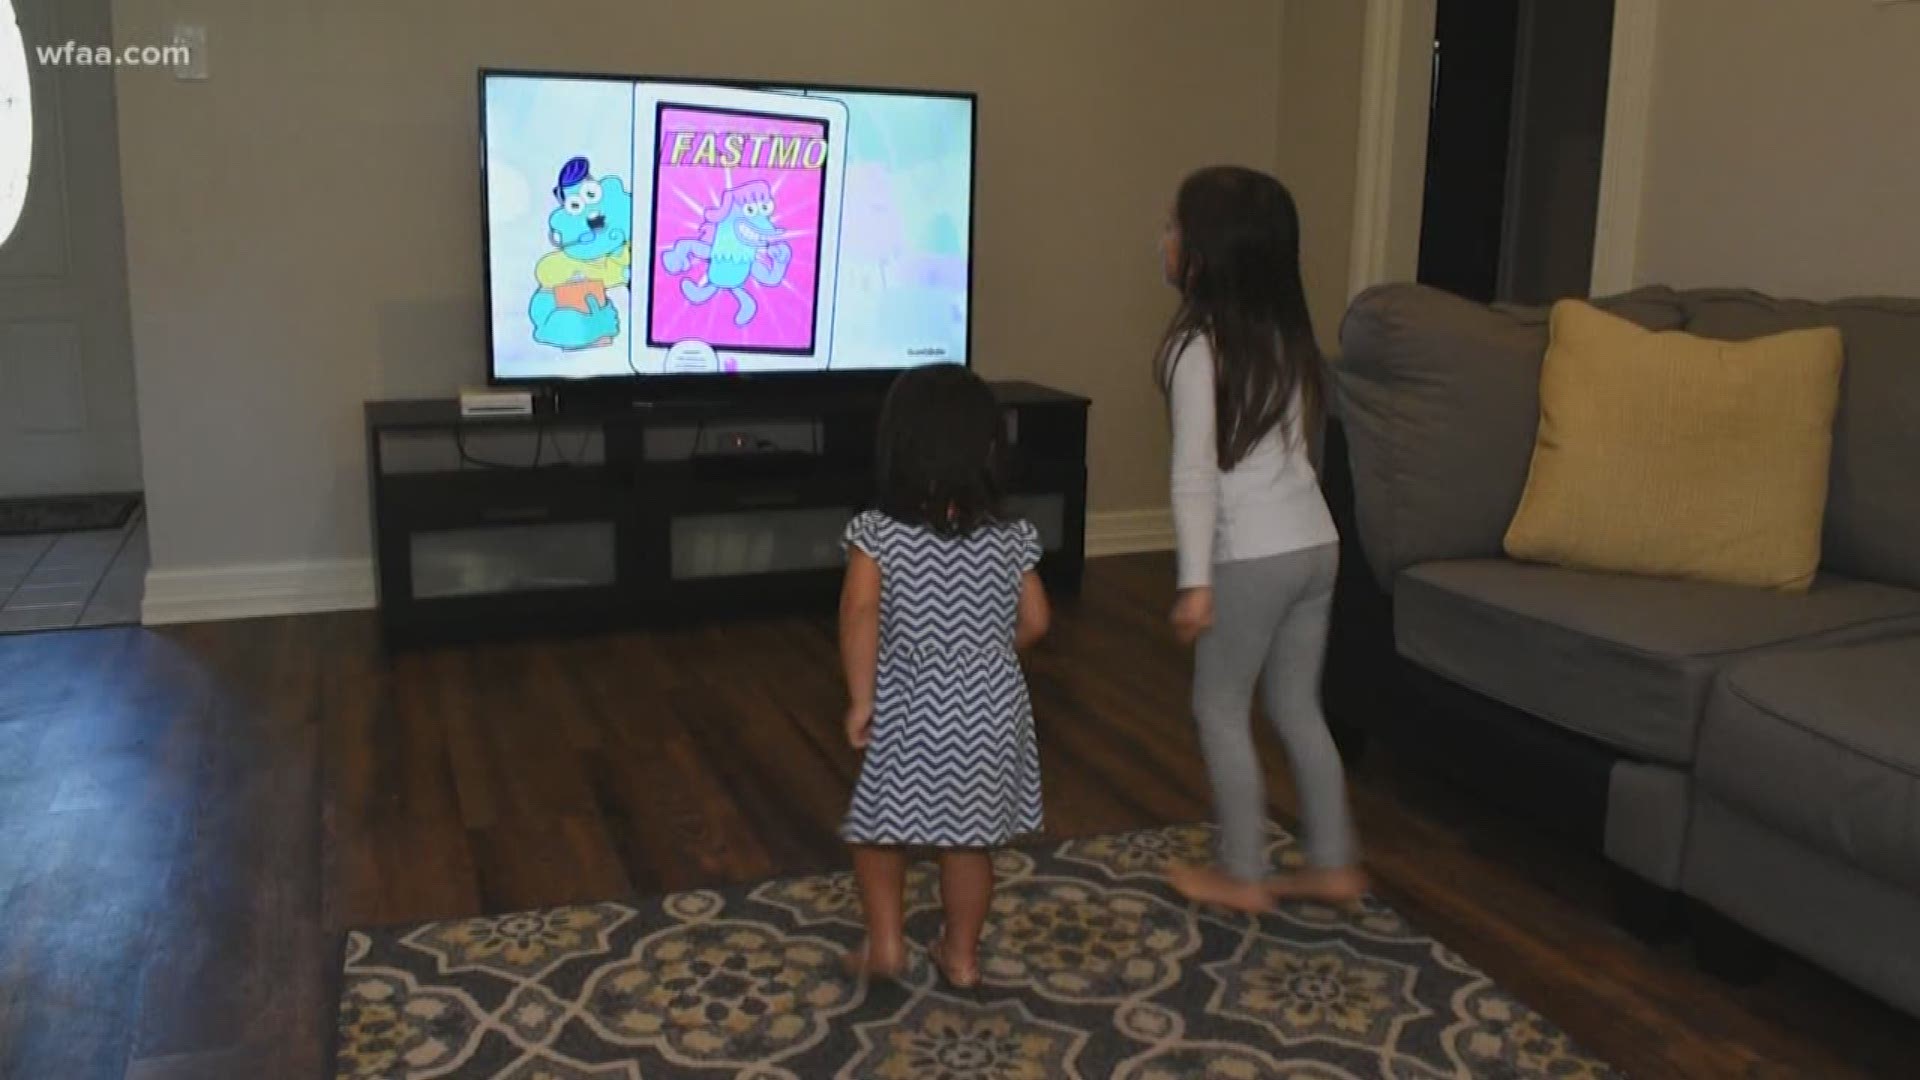 "We watch shows like Go Noodle on YouTube, which encourages doing jumping jacks or silly dance moves," says Fort Worth mom, Lauren Stockard.